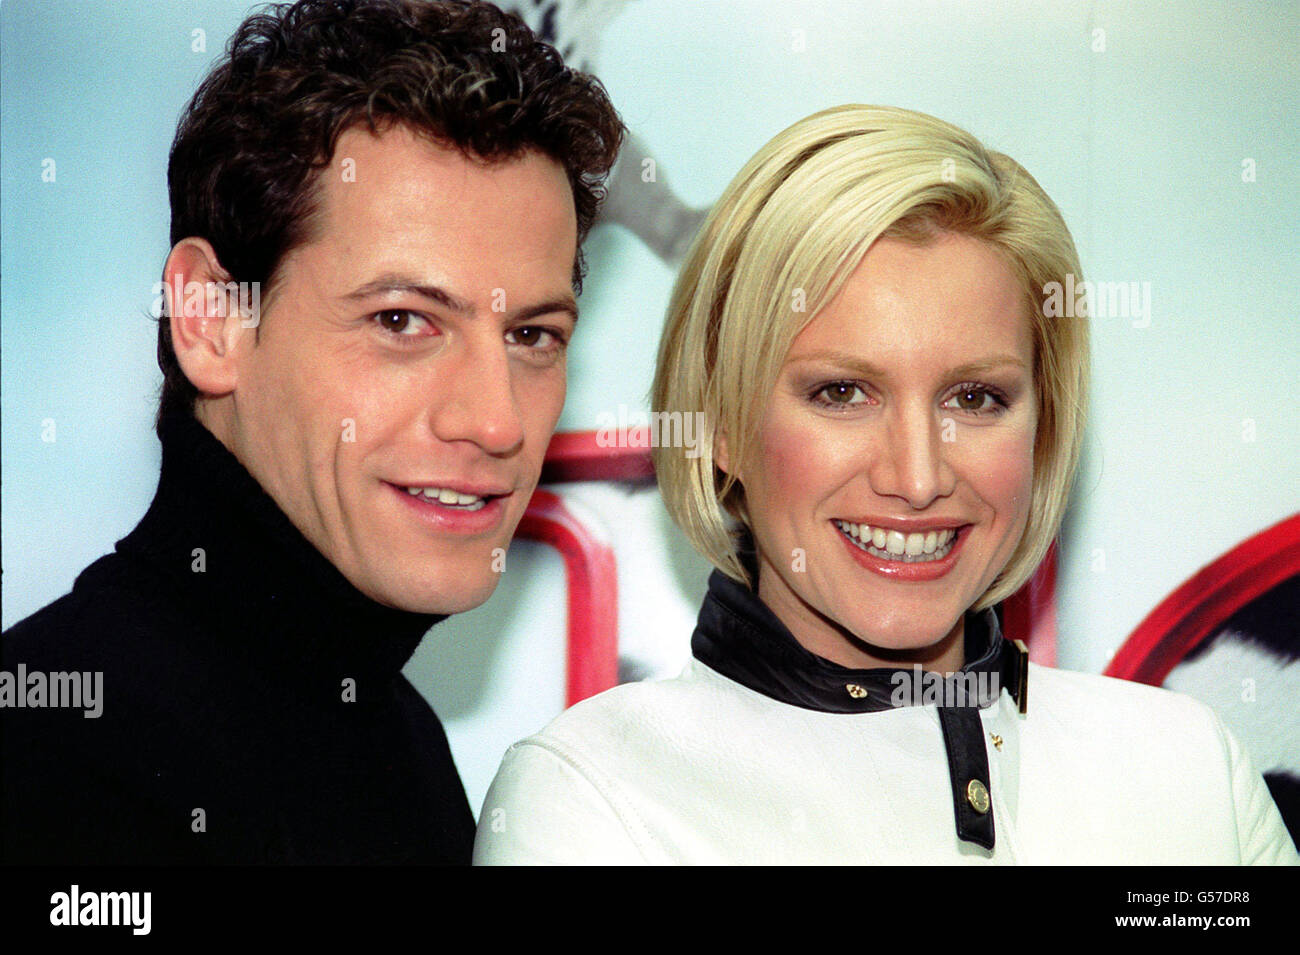 Actress Alice Evans who plays Chloe Simon and actor Ioan Gruffudd who plays Kevin Sheperd in the new film 102 Dalmations at Waterloo Station in London, to launch Disney's 102 Dalmations Eurostar train. 24/03/02: Ioan Gruffudd and Alice Evans who played Kevin Sheperd and Chloe Simon in the film 102 Dalmations. Hornblower star Gruffudd has revealed in a magazine interview that he wants to have children. * 25/03/20002: Ioan Gruffudd and Alice Evans who played Kevin Sheperd and Chloe Simon in the film 102 Dalmations. Hornblower star Gruffudd has revealed in a magazine interview that he wants to Stock Photo